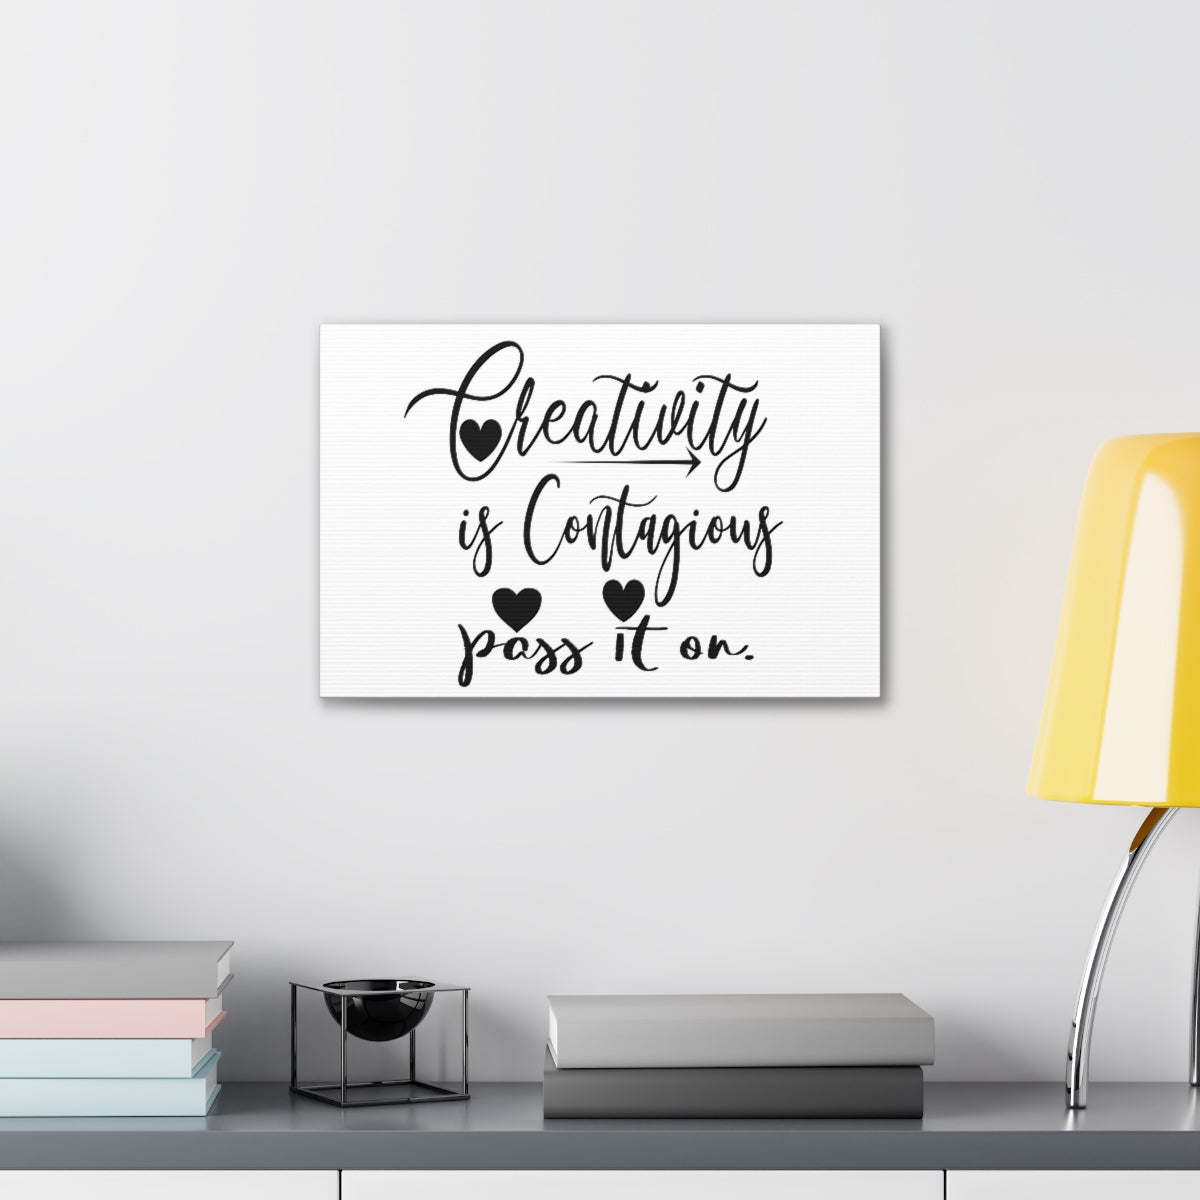 Scripture Walls Inspirational Wall Art Creativity Is Contagious Romans 12:6 Motivation Wall Decor for Home Office Gym Inspiring Success Quote Print Ready to Hang Unframed-Express Your Love Gifts